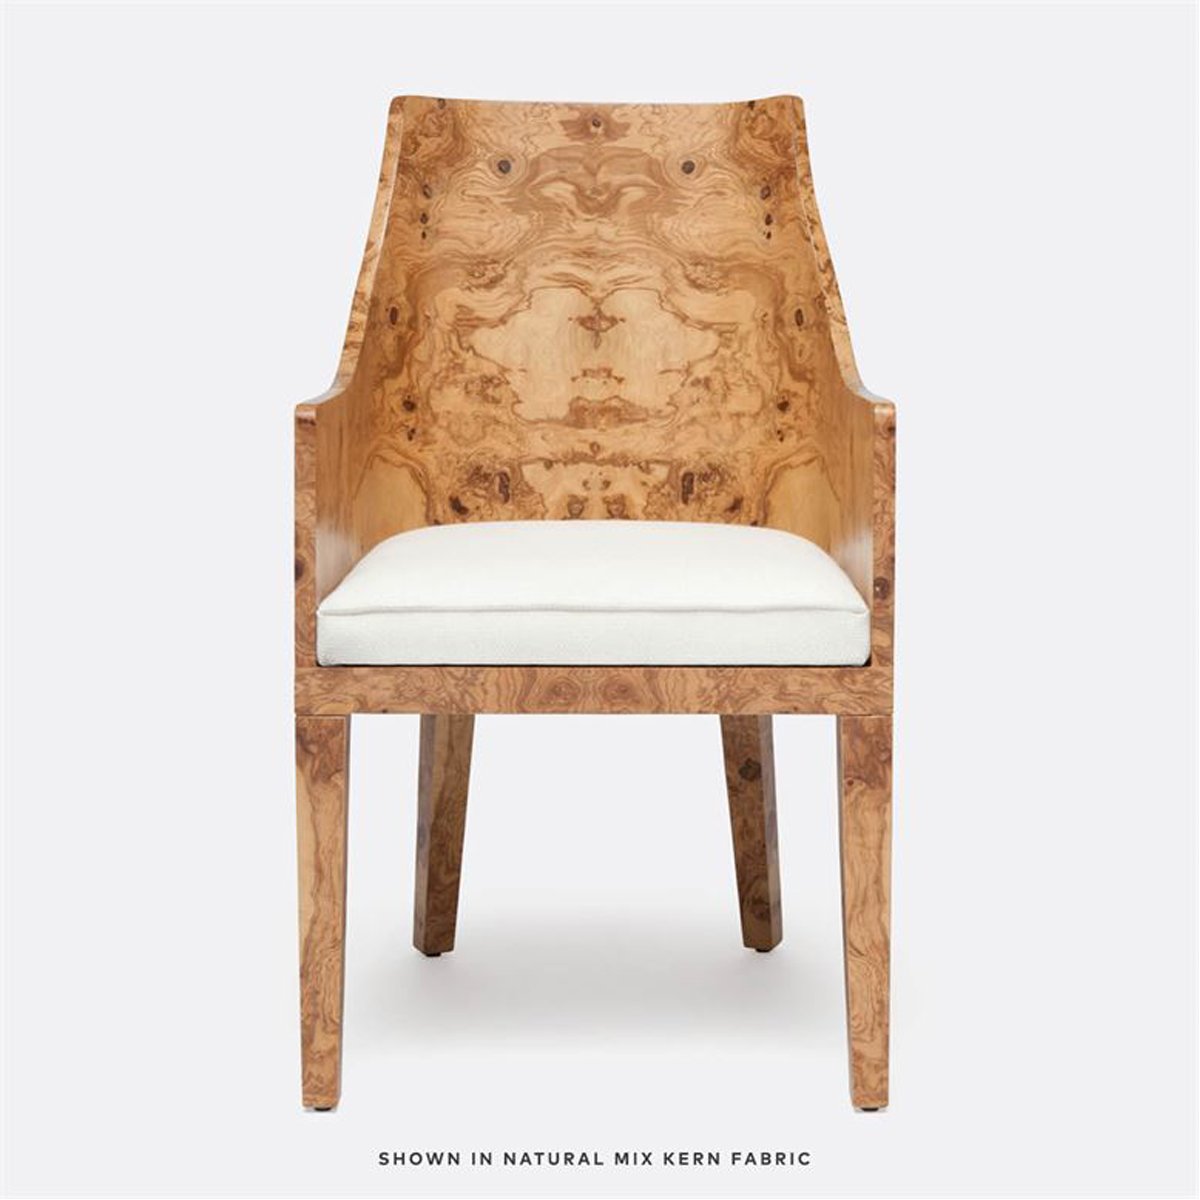 Made Goods Everett Olive Ash Arm Chair in Rhone Forest Full-Grain Leather